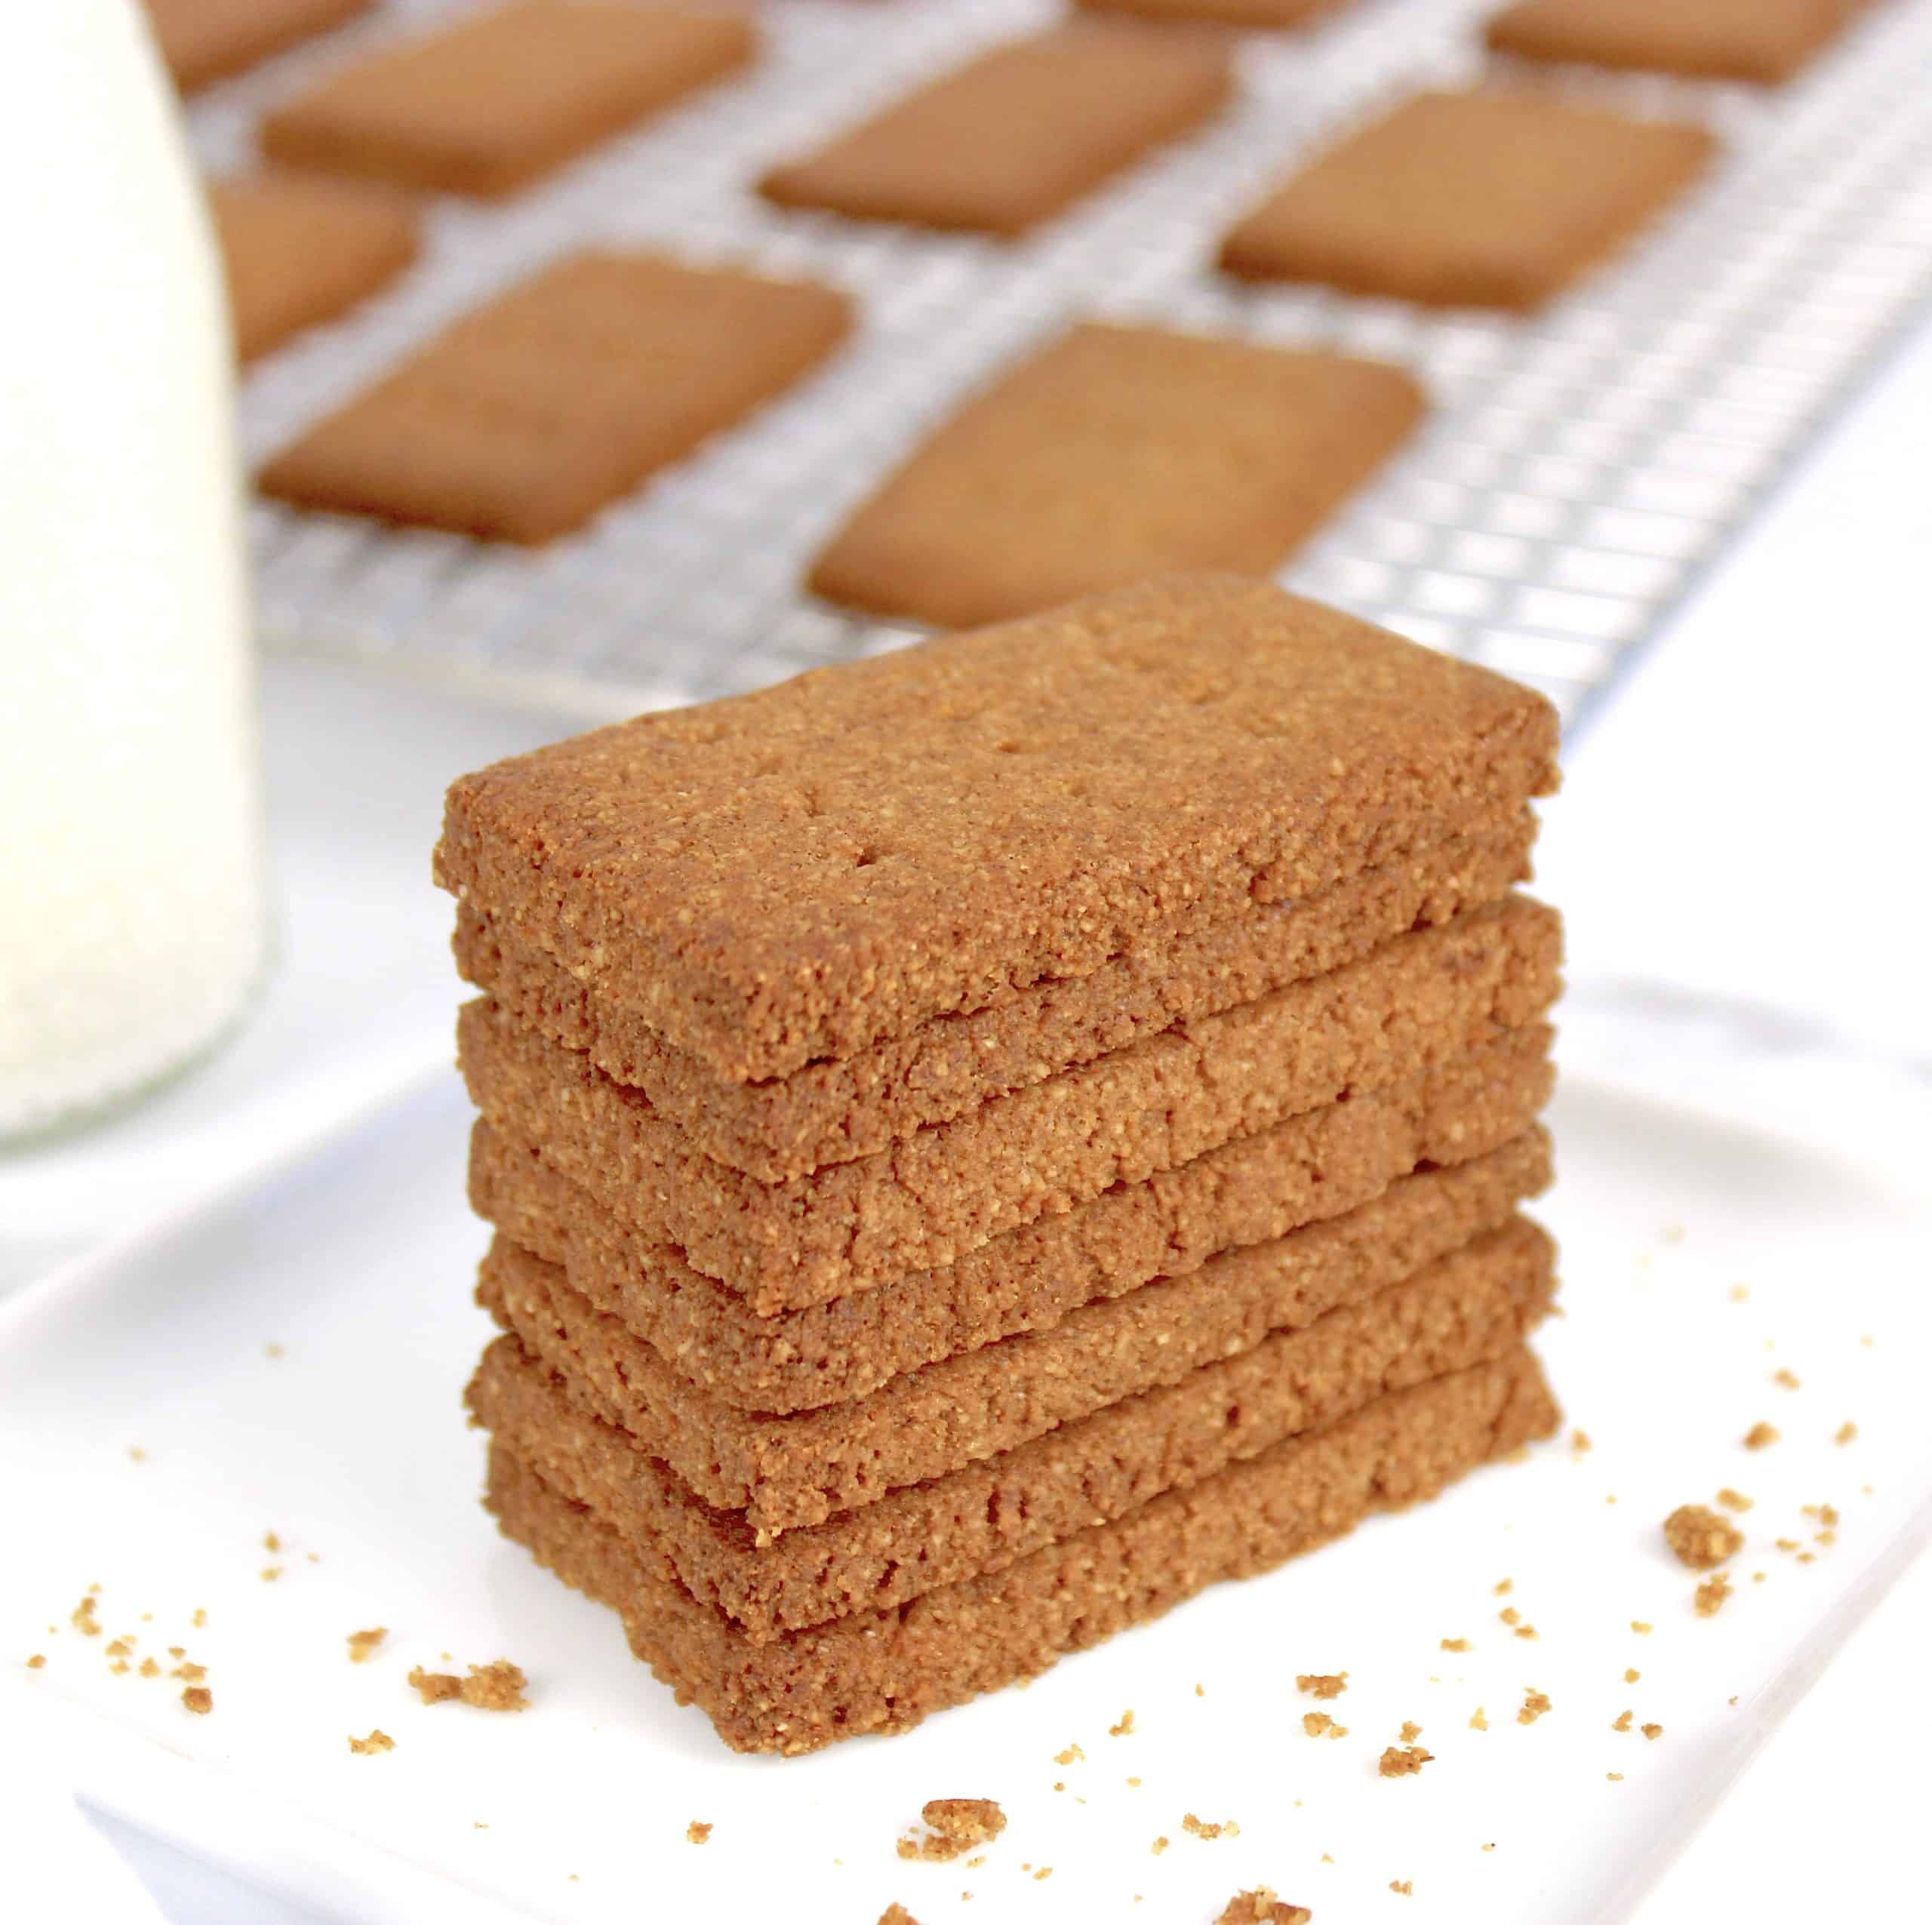 stack of graham crackers on white plate with milk bottle on side